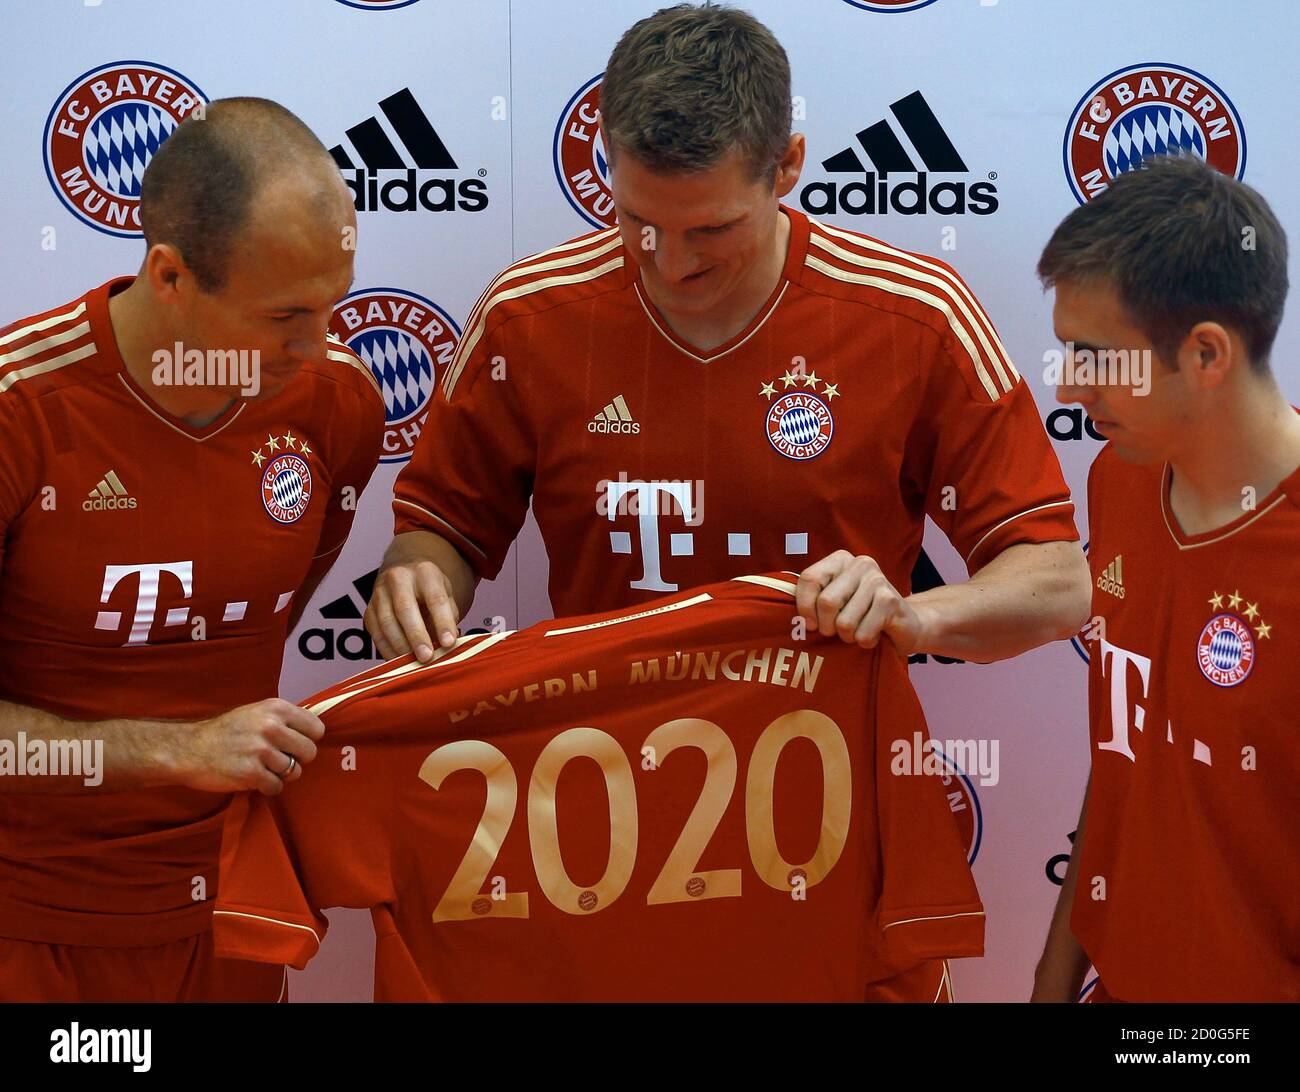 Arjen Robben (L), Philipp Lahm (R) and Bastian Schweisteiger of FC Bayern  Munich present the club's new soccer jersey in Munich April 19, 2011.  Bayern Munich extended its contract with the German